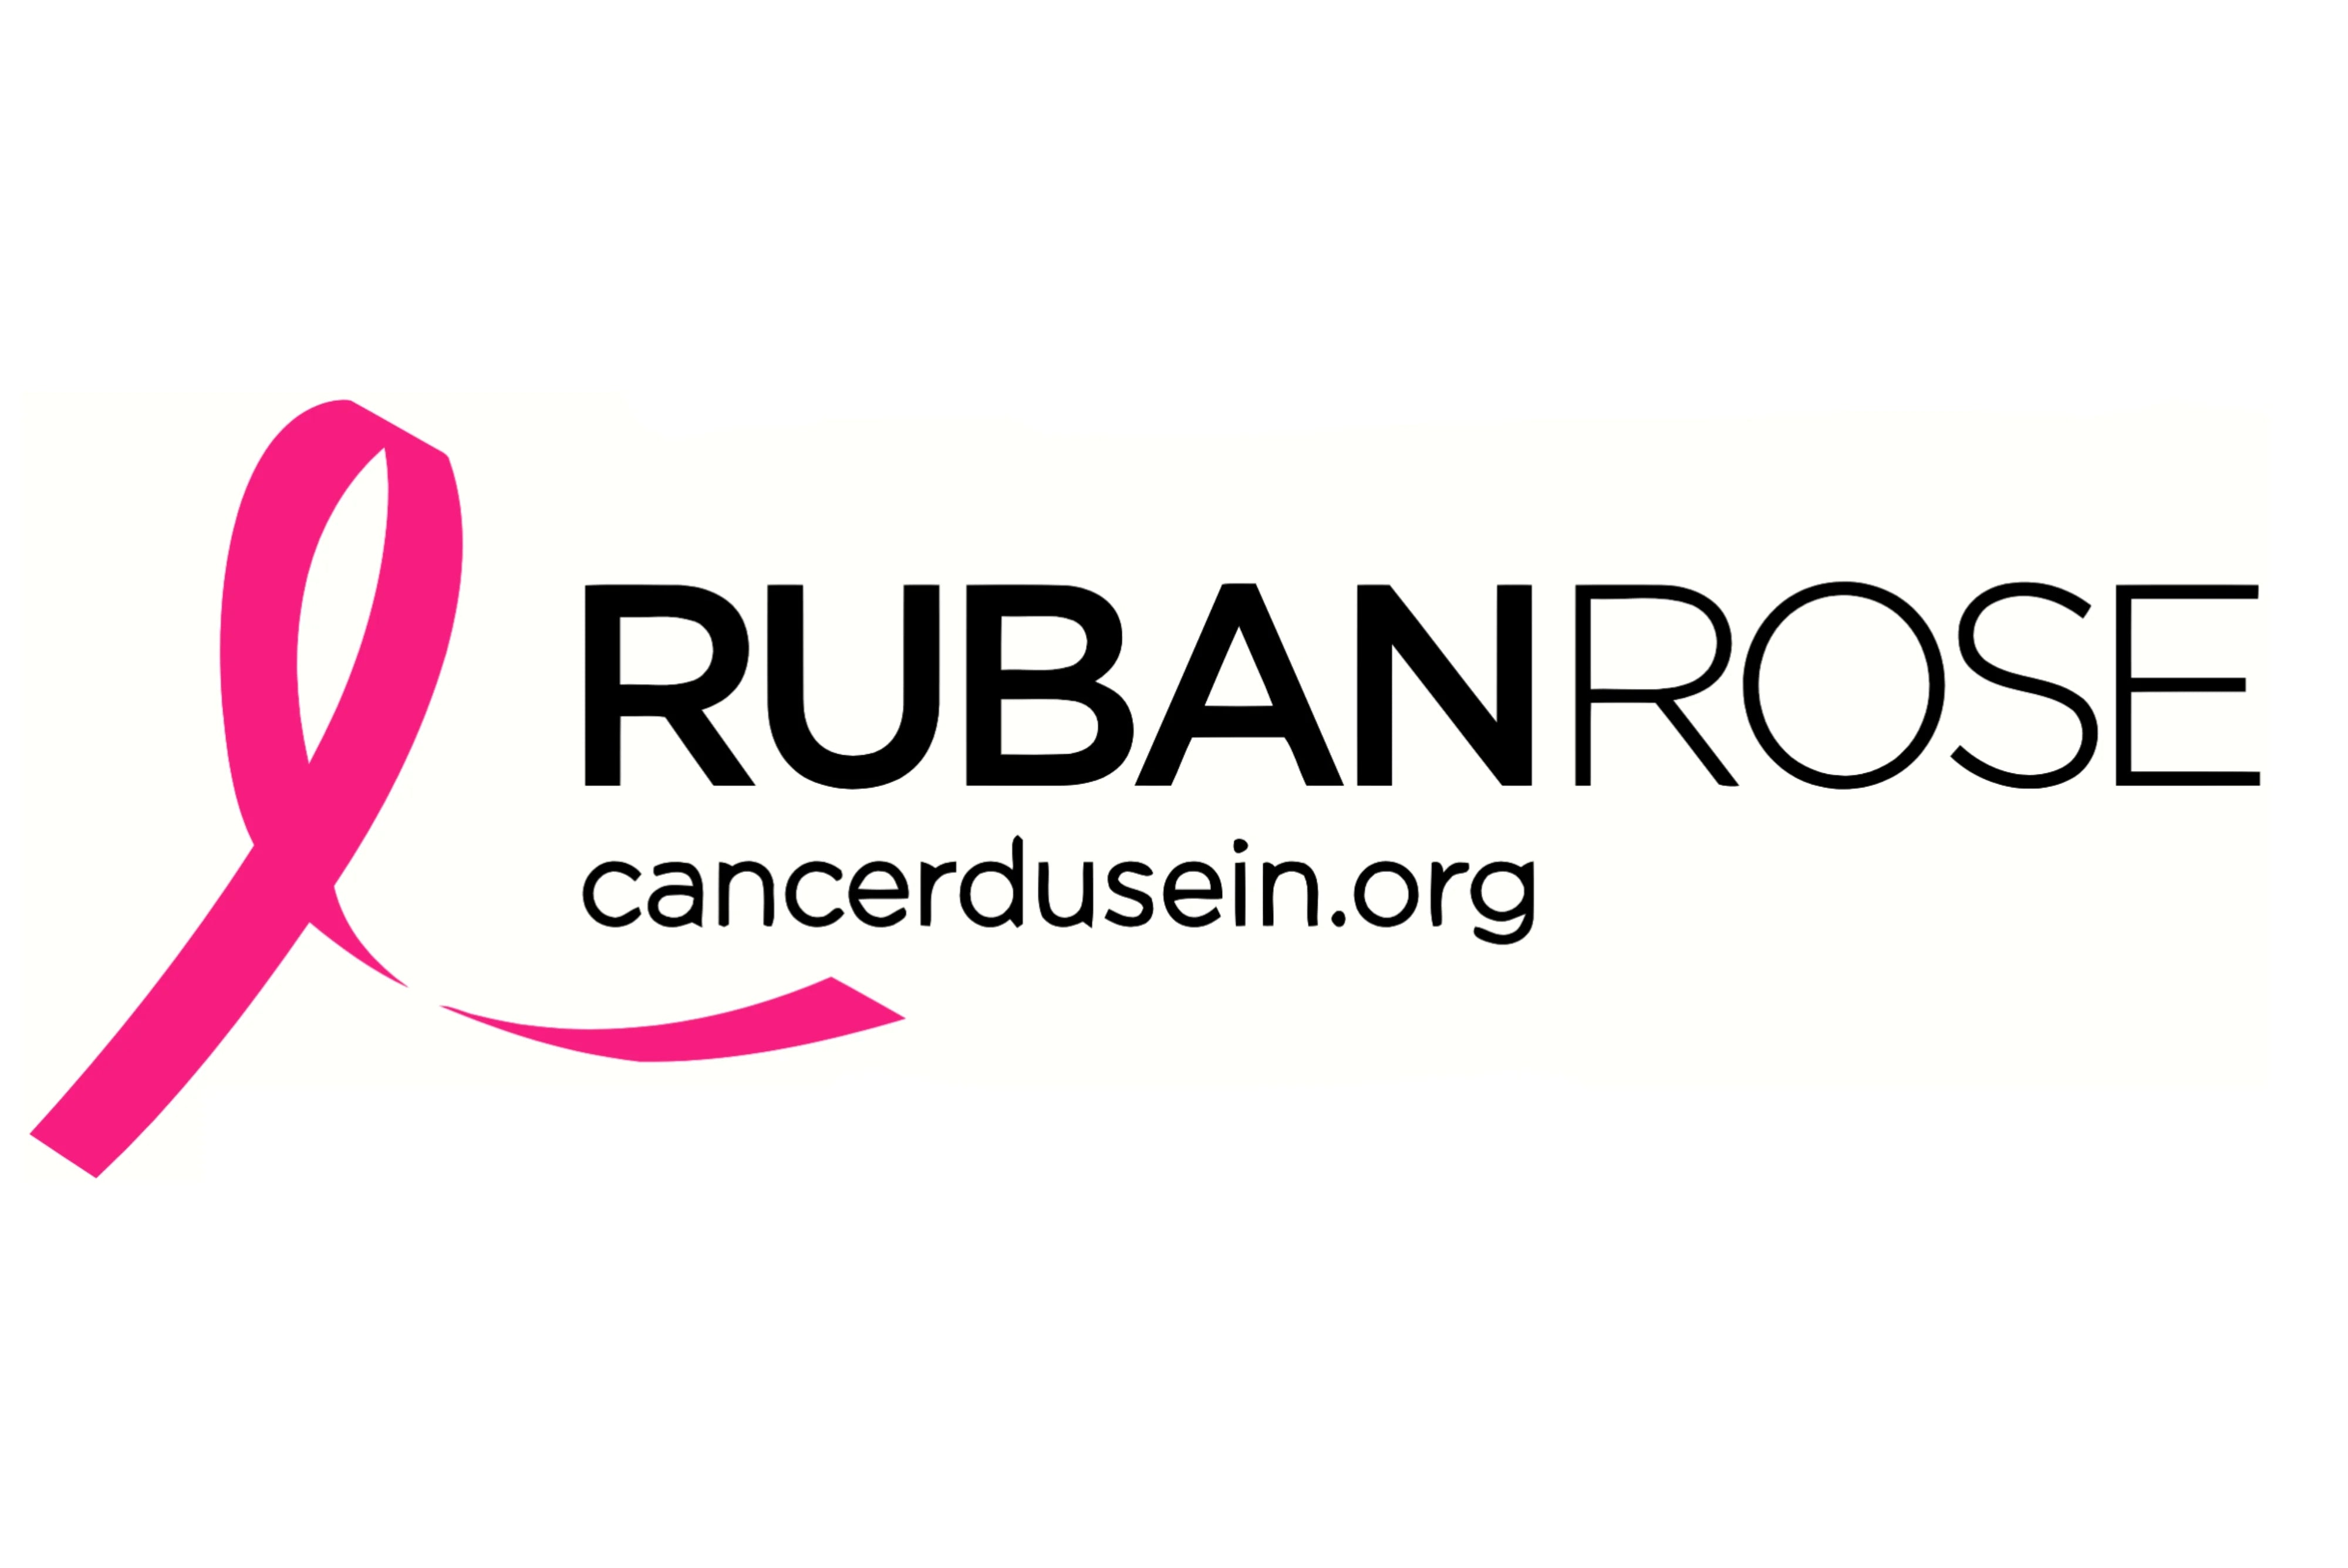 Logo and website link of the 'Pink Ribbon' association.